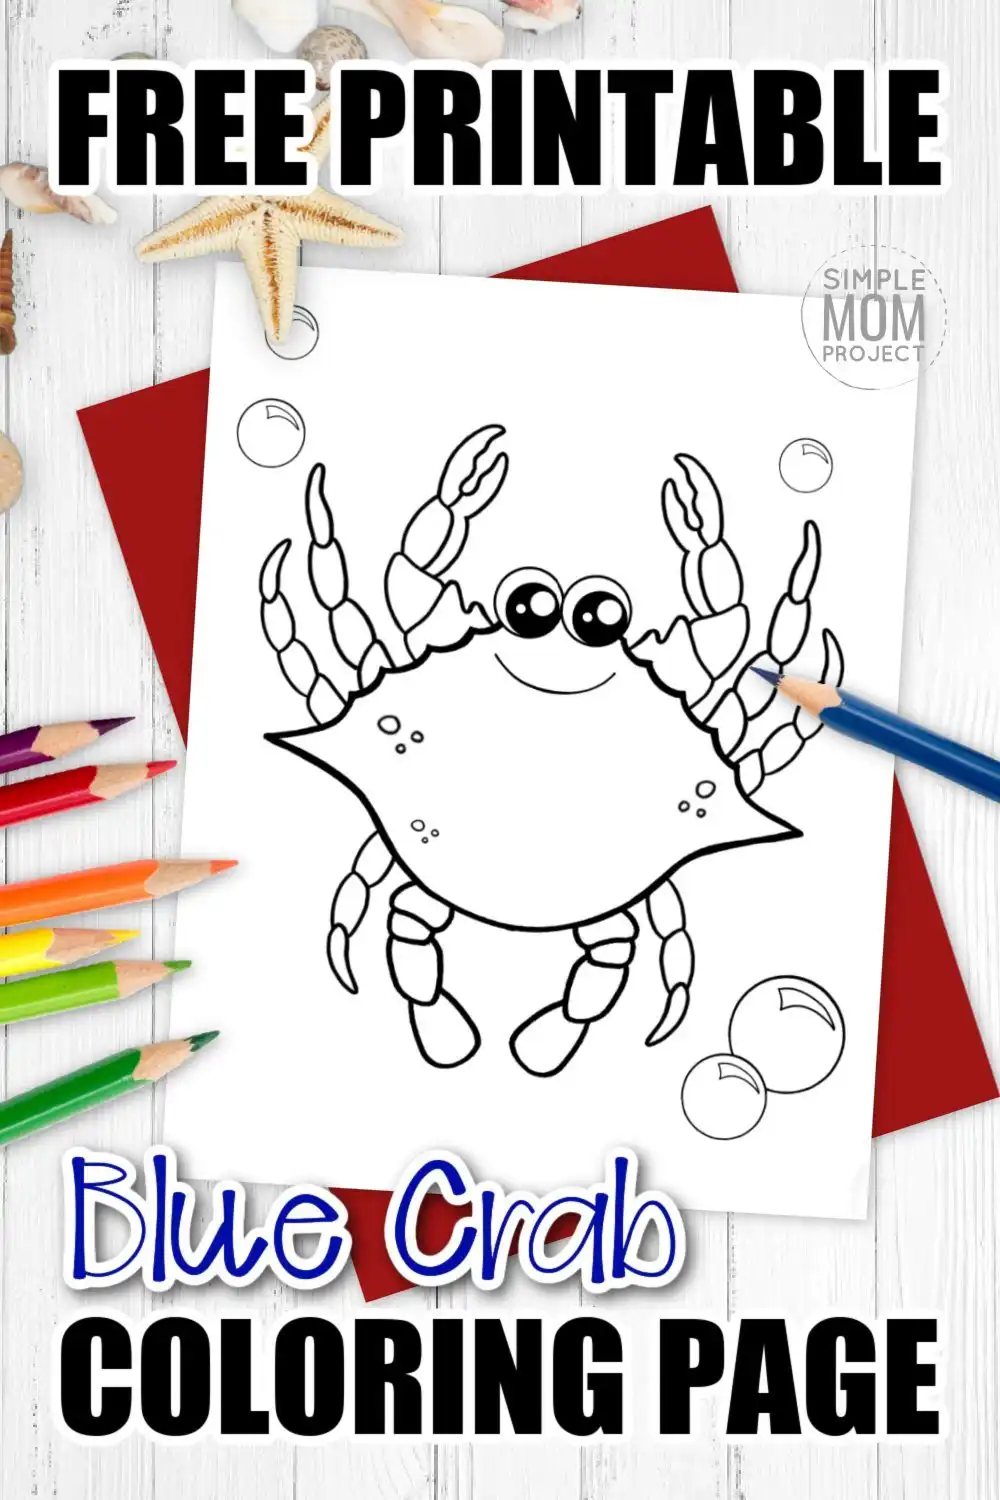 Free printable lobster coloring page â simple mom project